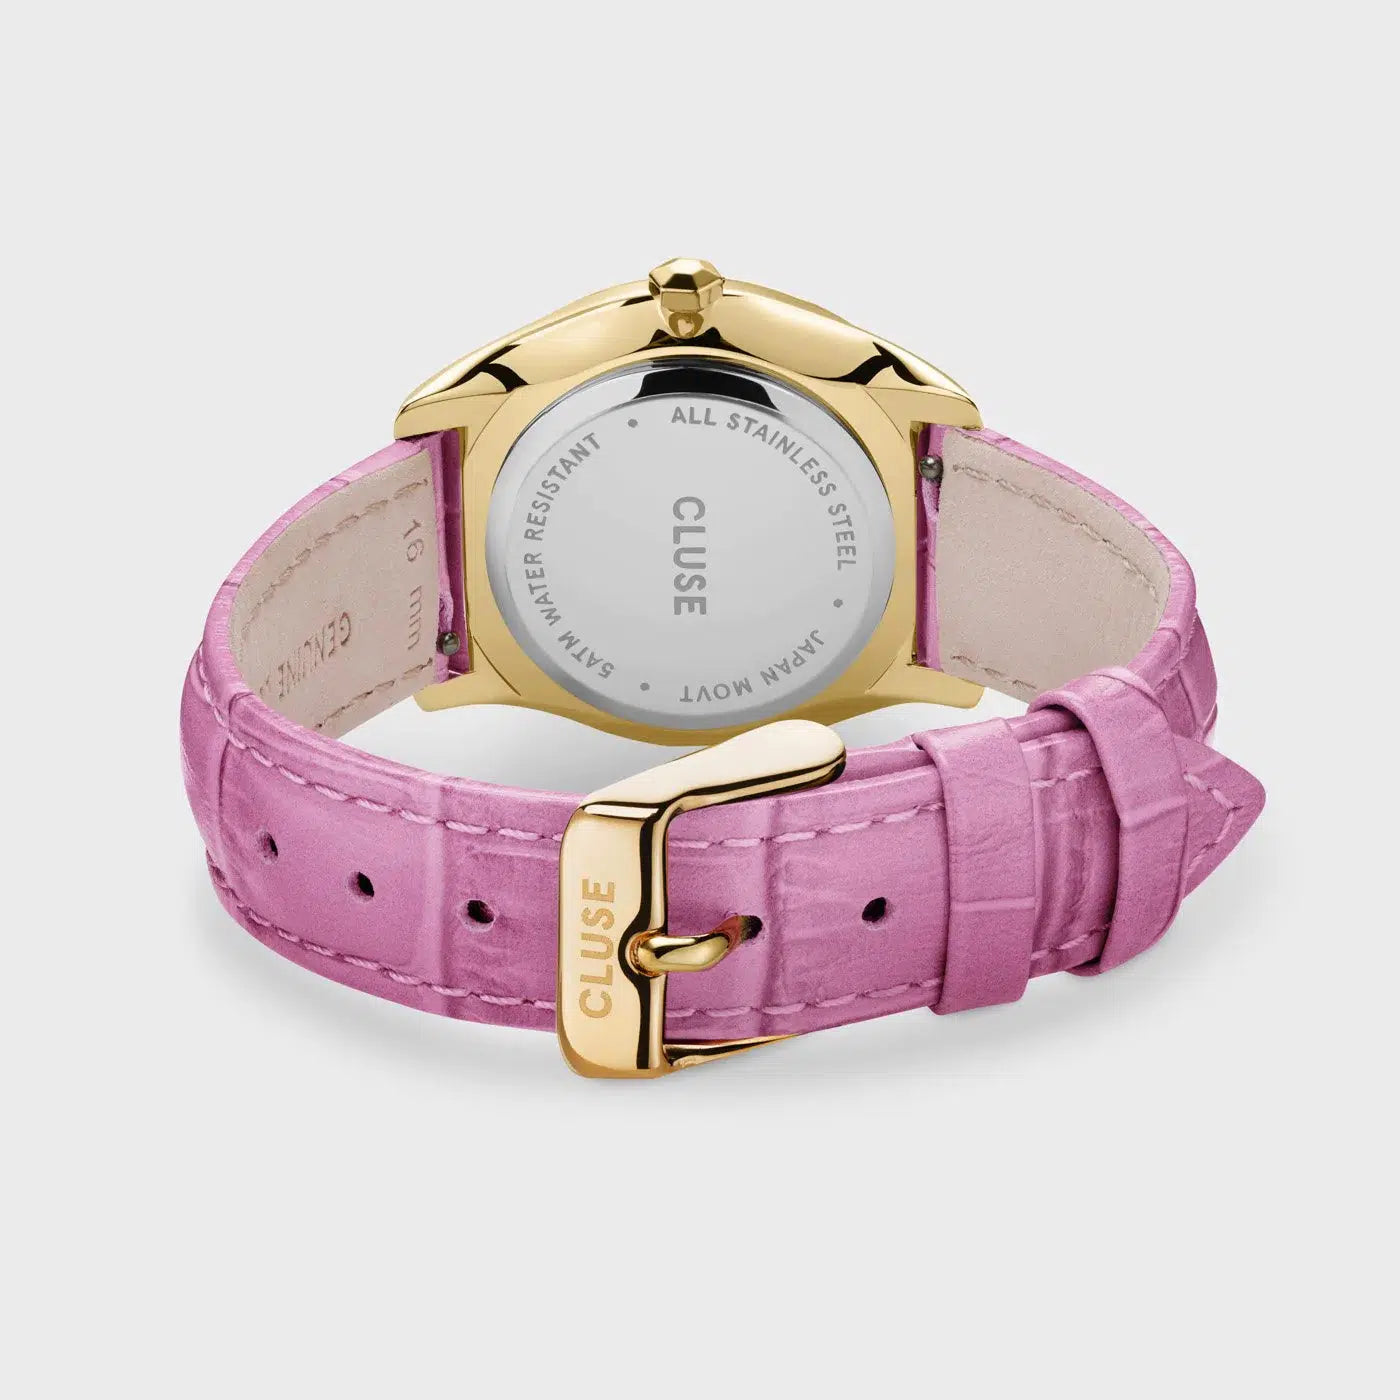 Féroce Petite Leather Croco Pink, Gold